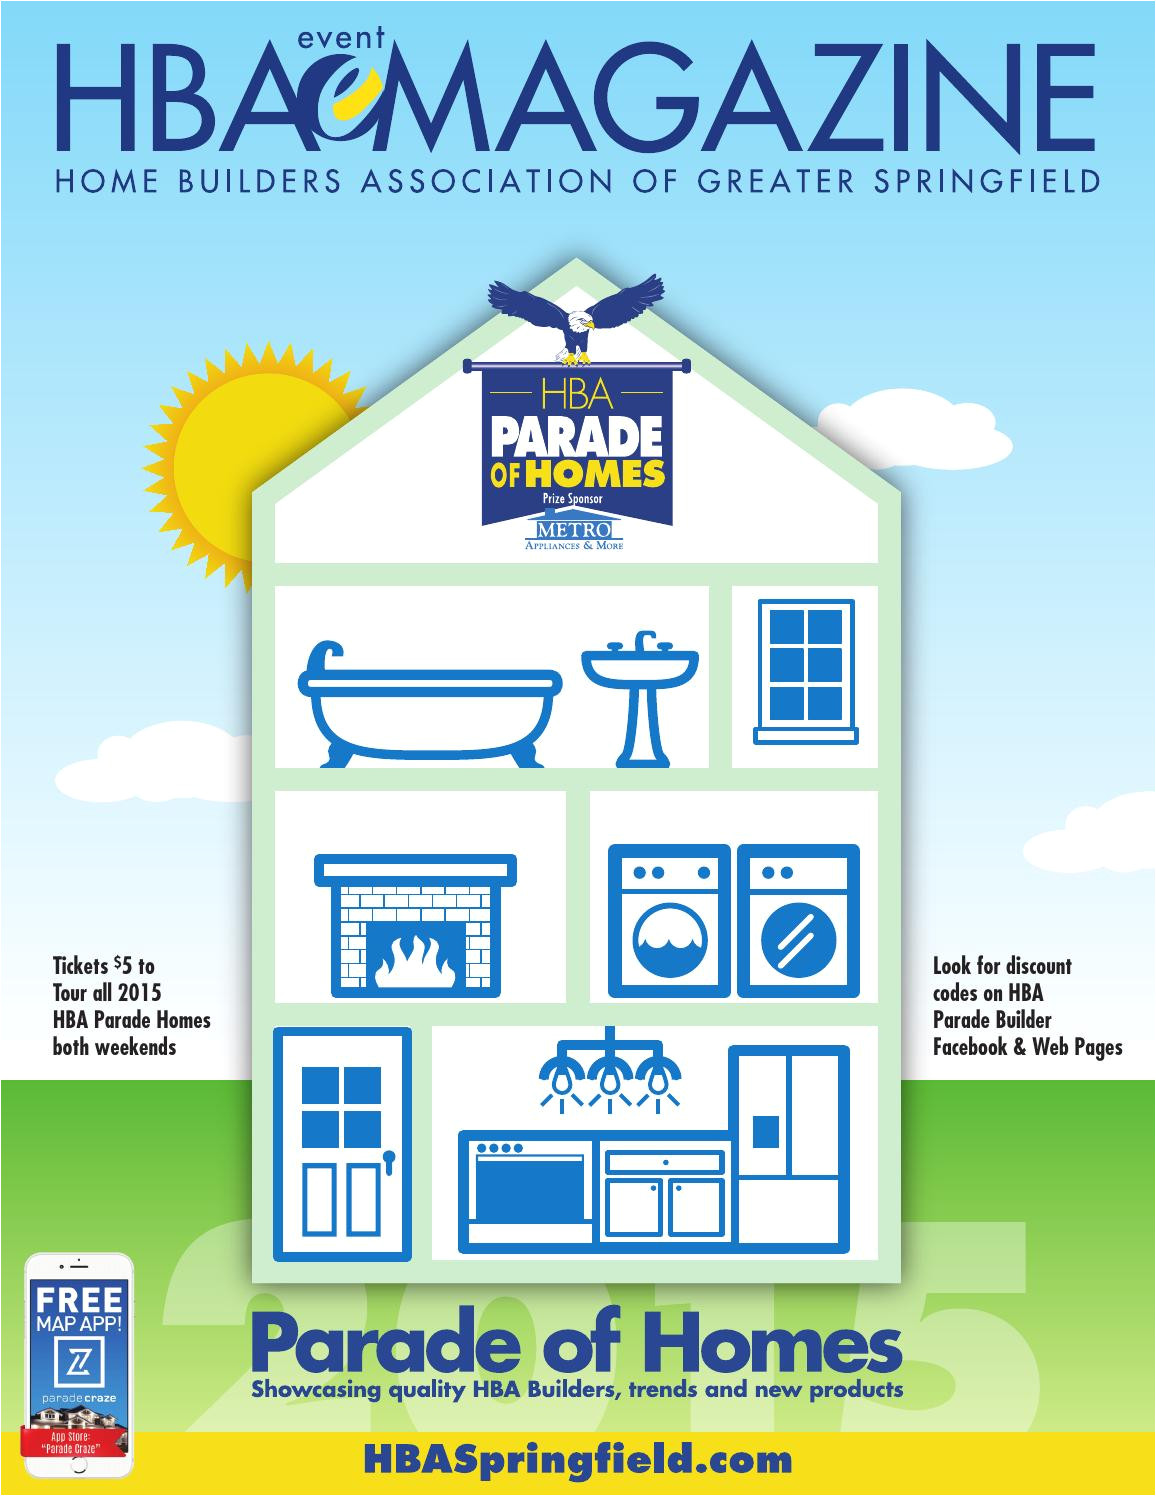 hba magazine parade of homes edition 2015 by home builders association of greater springfield issuu